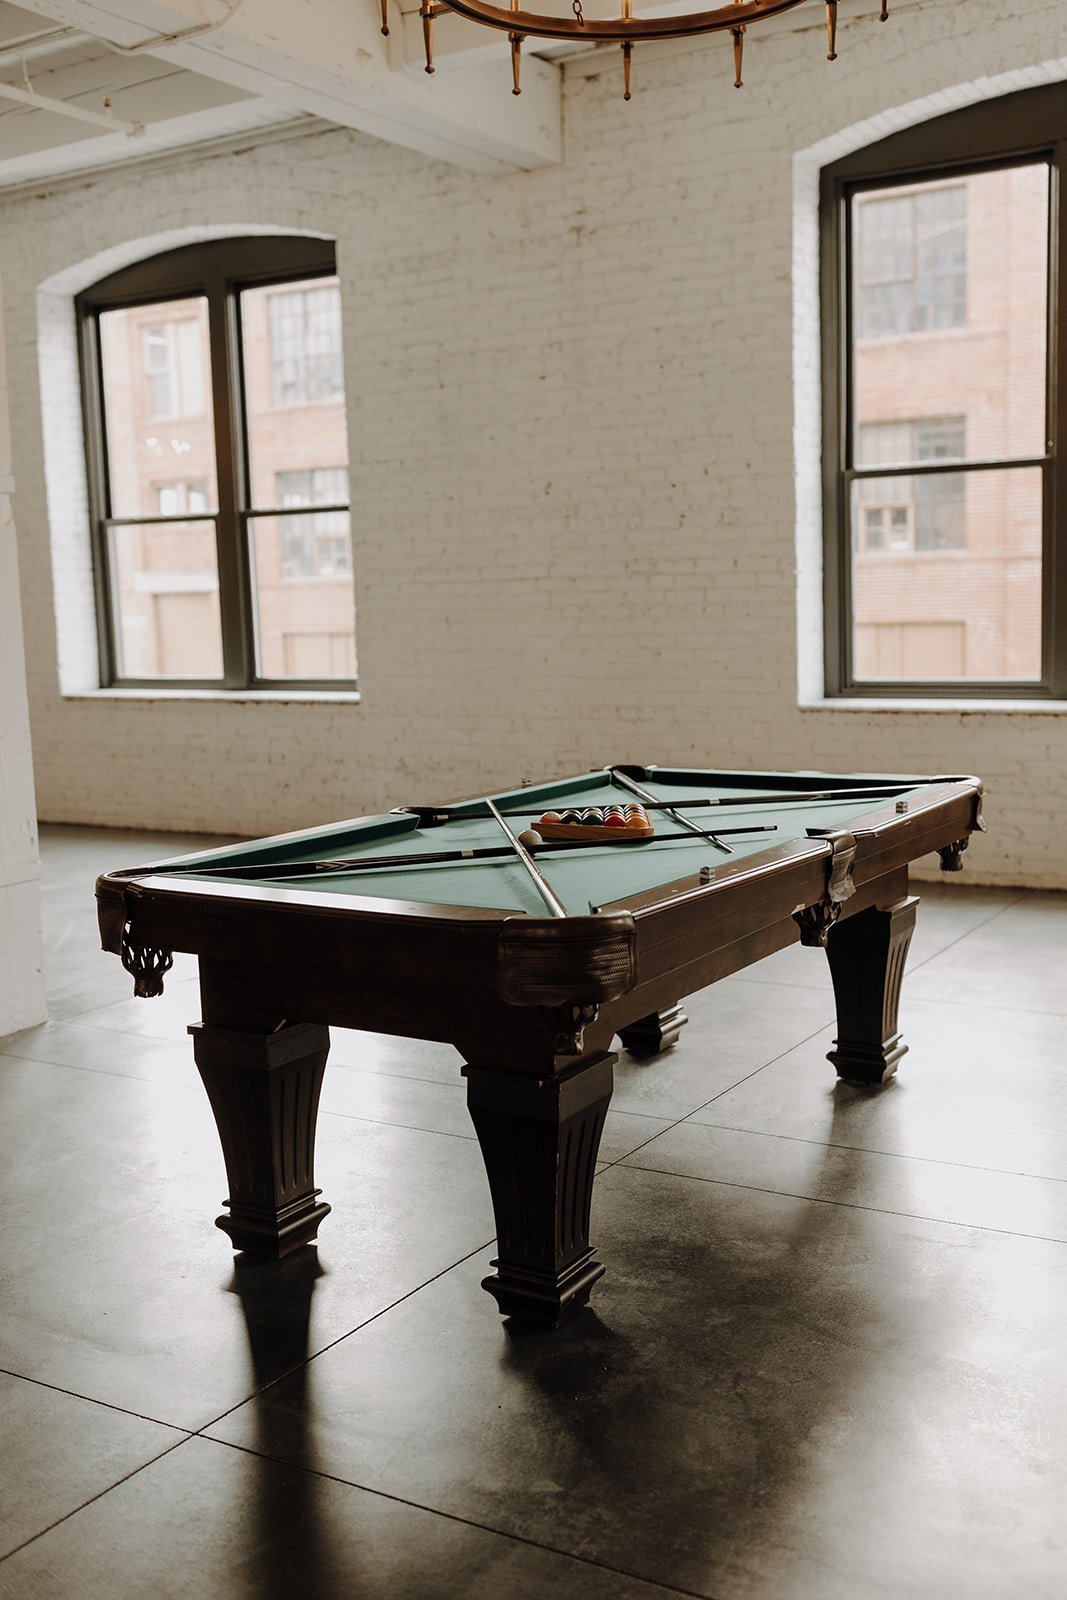 Pool table decoration for non-traditional wedding